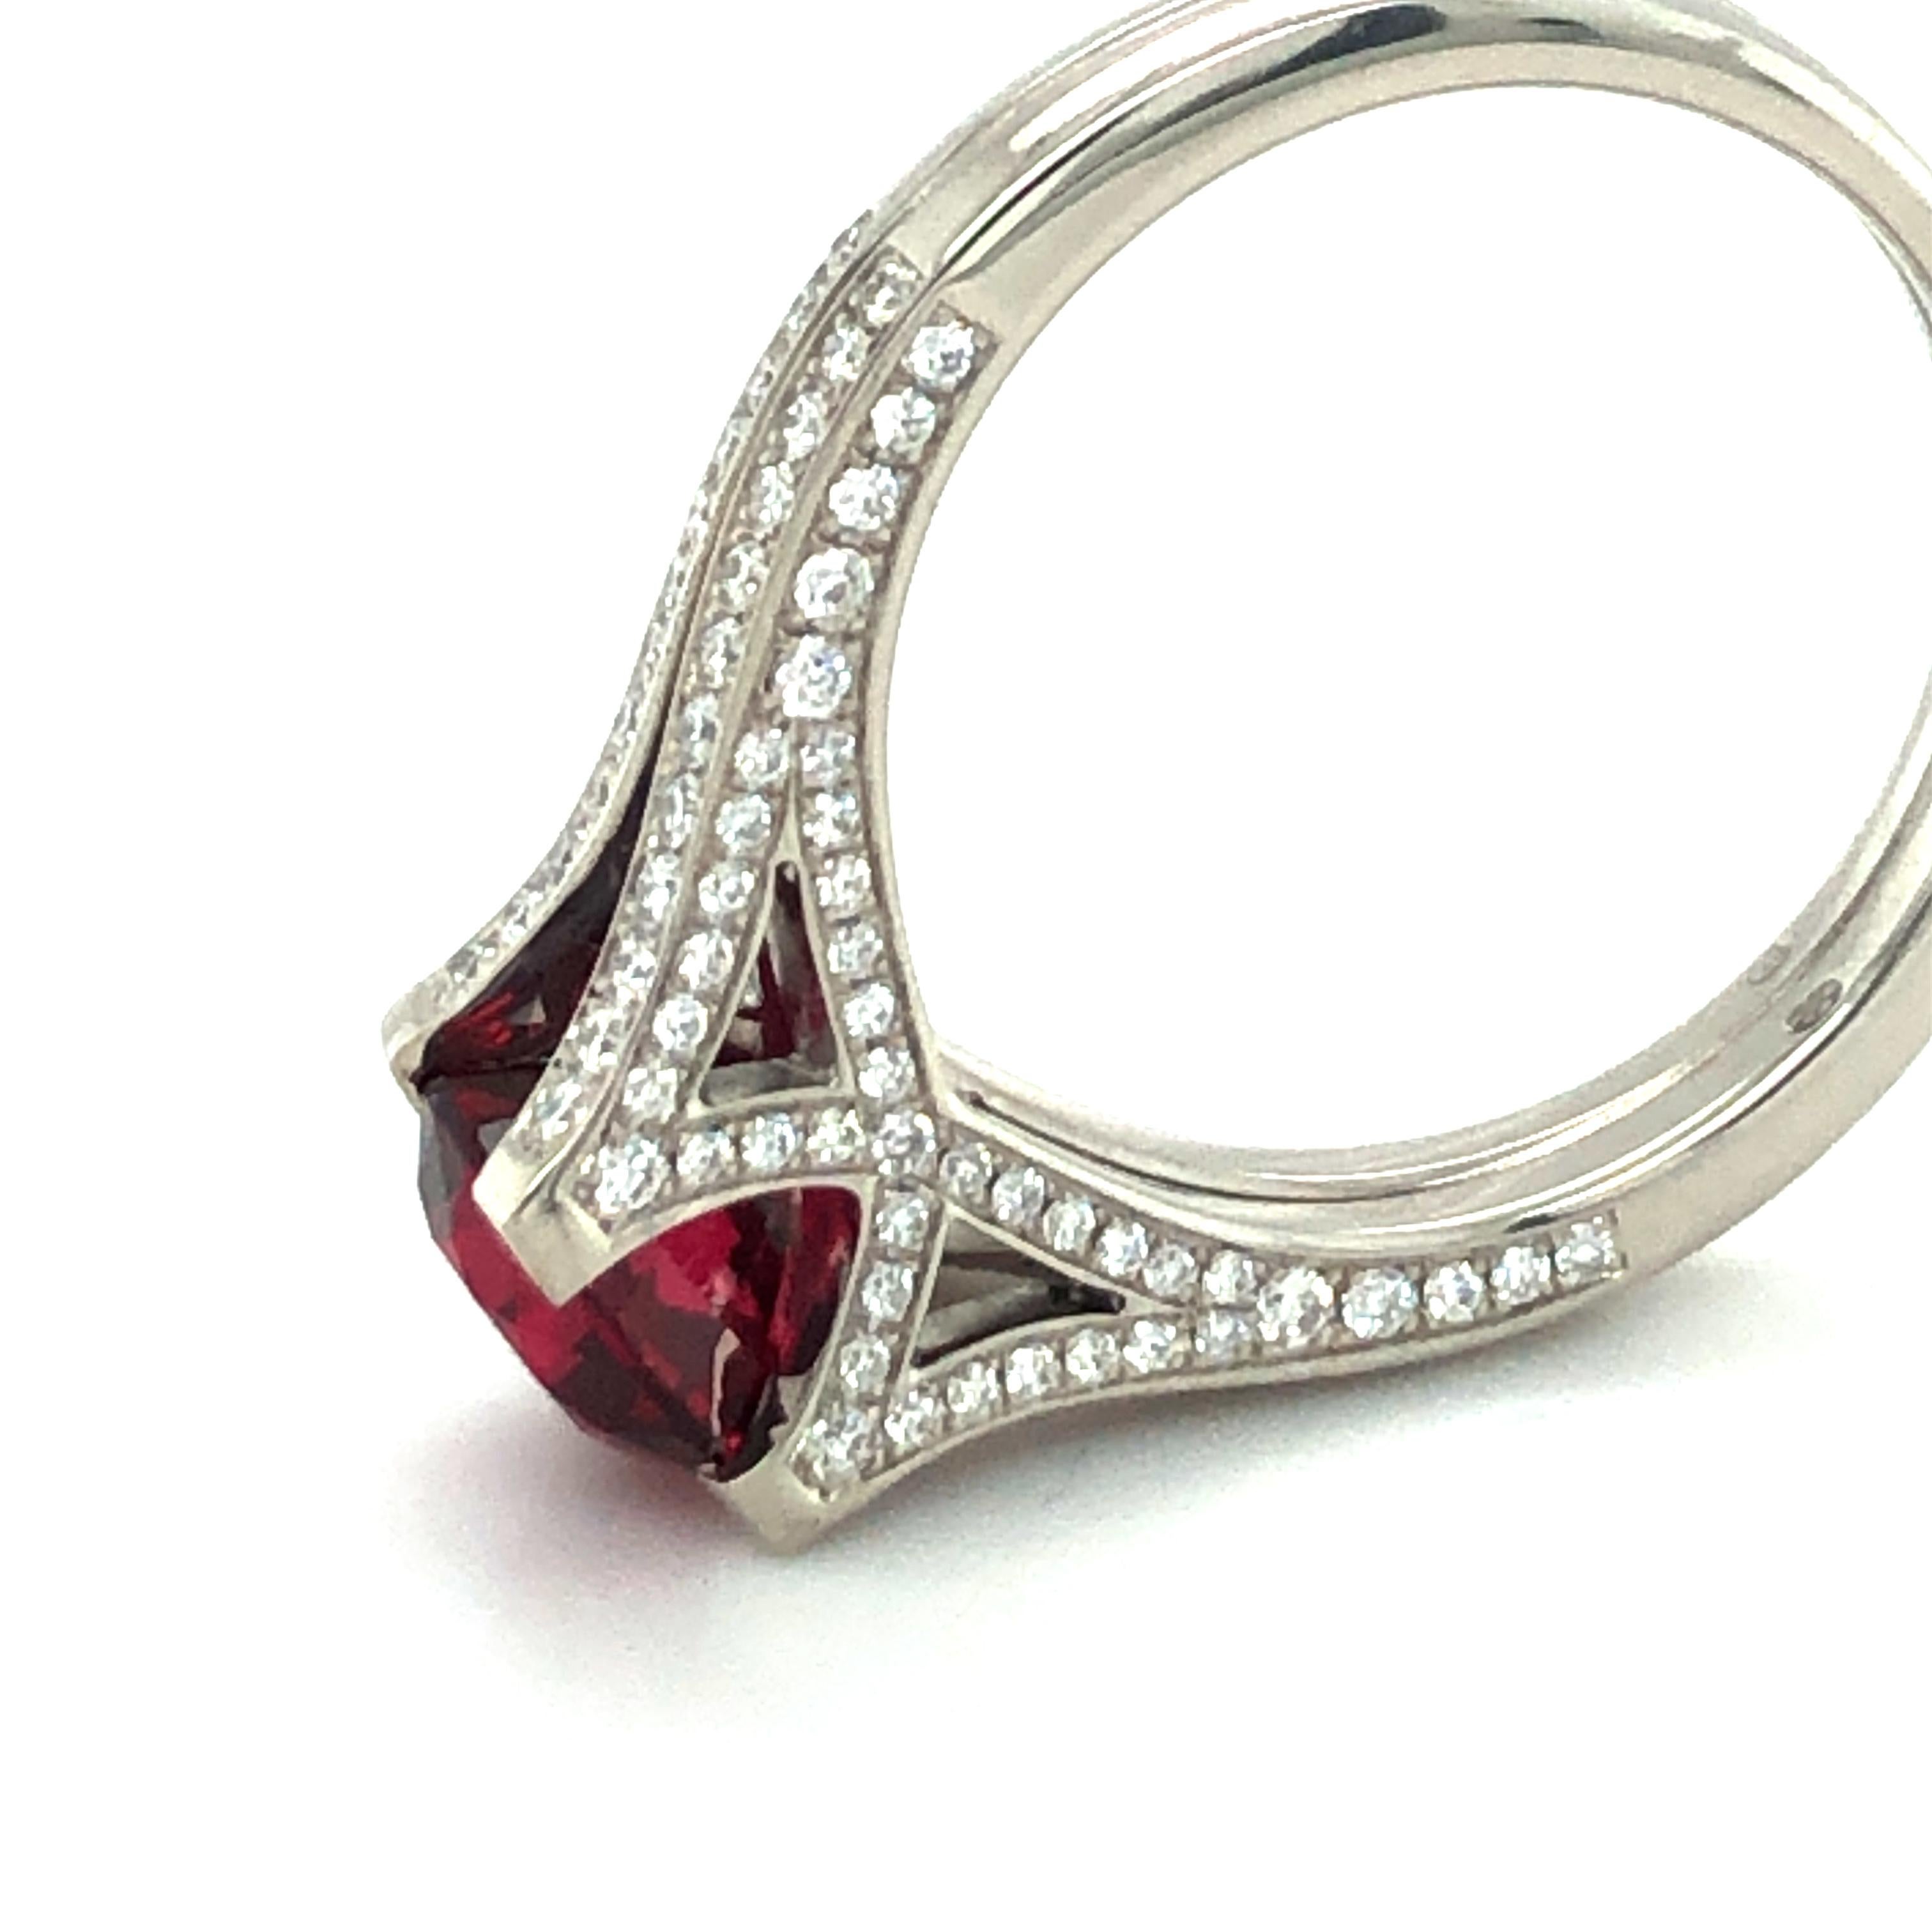 Gubelin Ring Set with Glowing Red Spinel and Diamonds in 18k White Gold 3